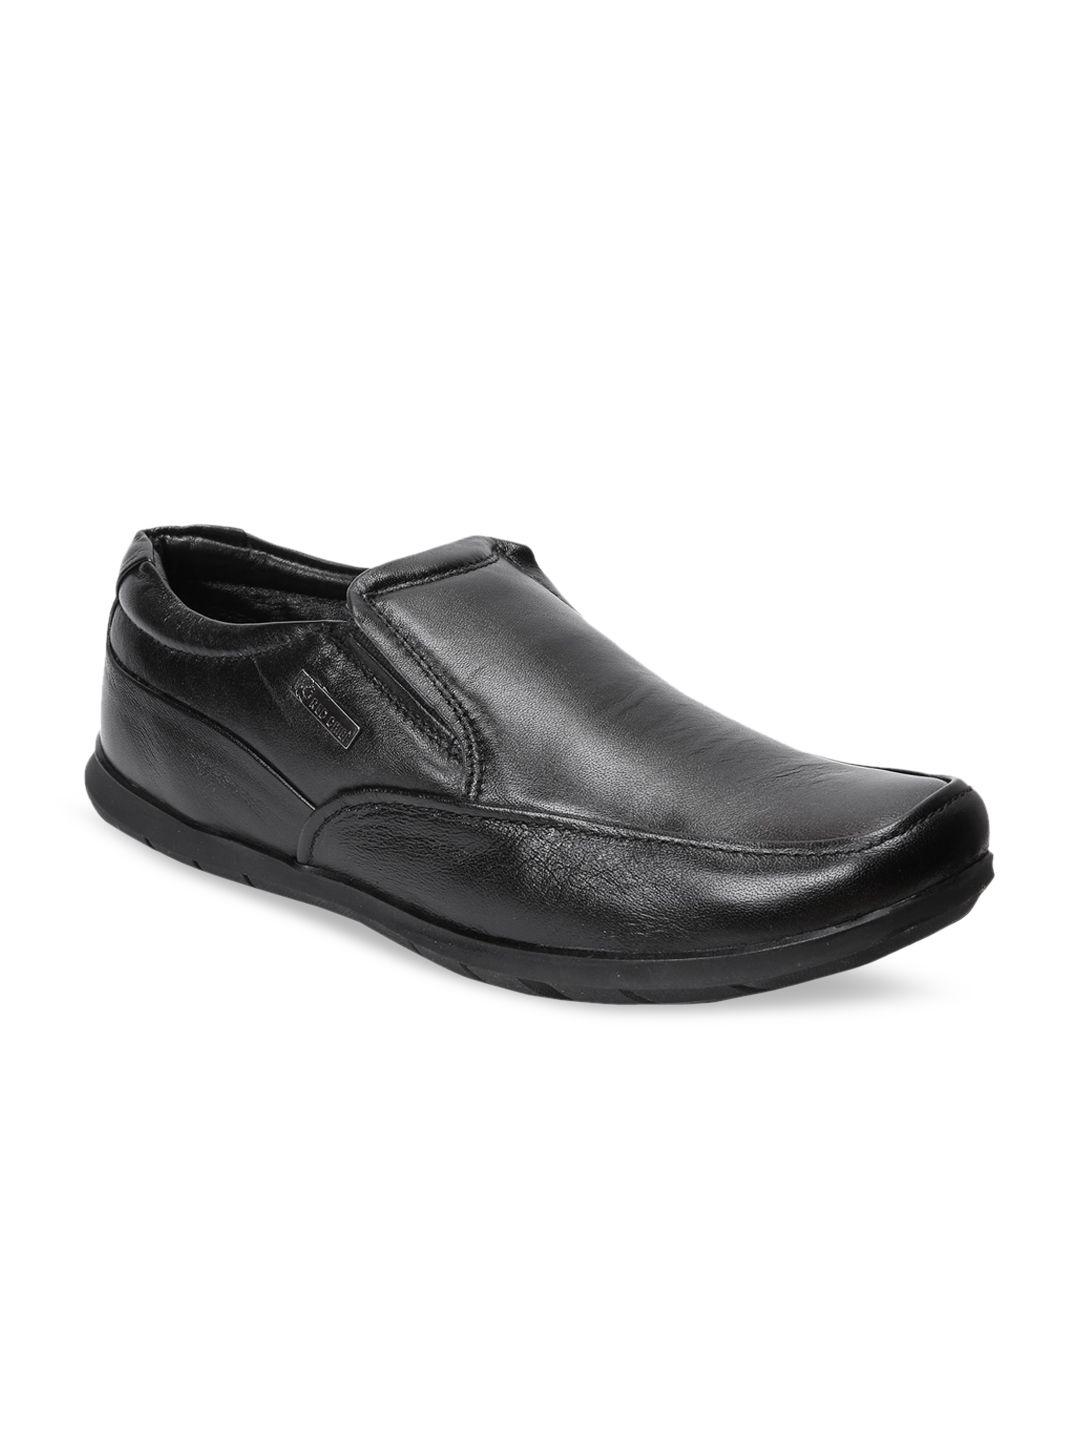 red-chief-men-black-solid-leather-formal-slip-ons